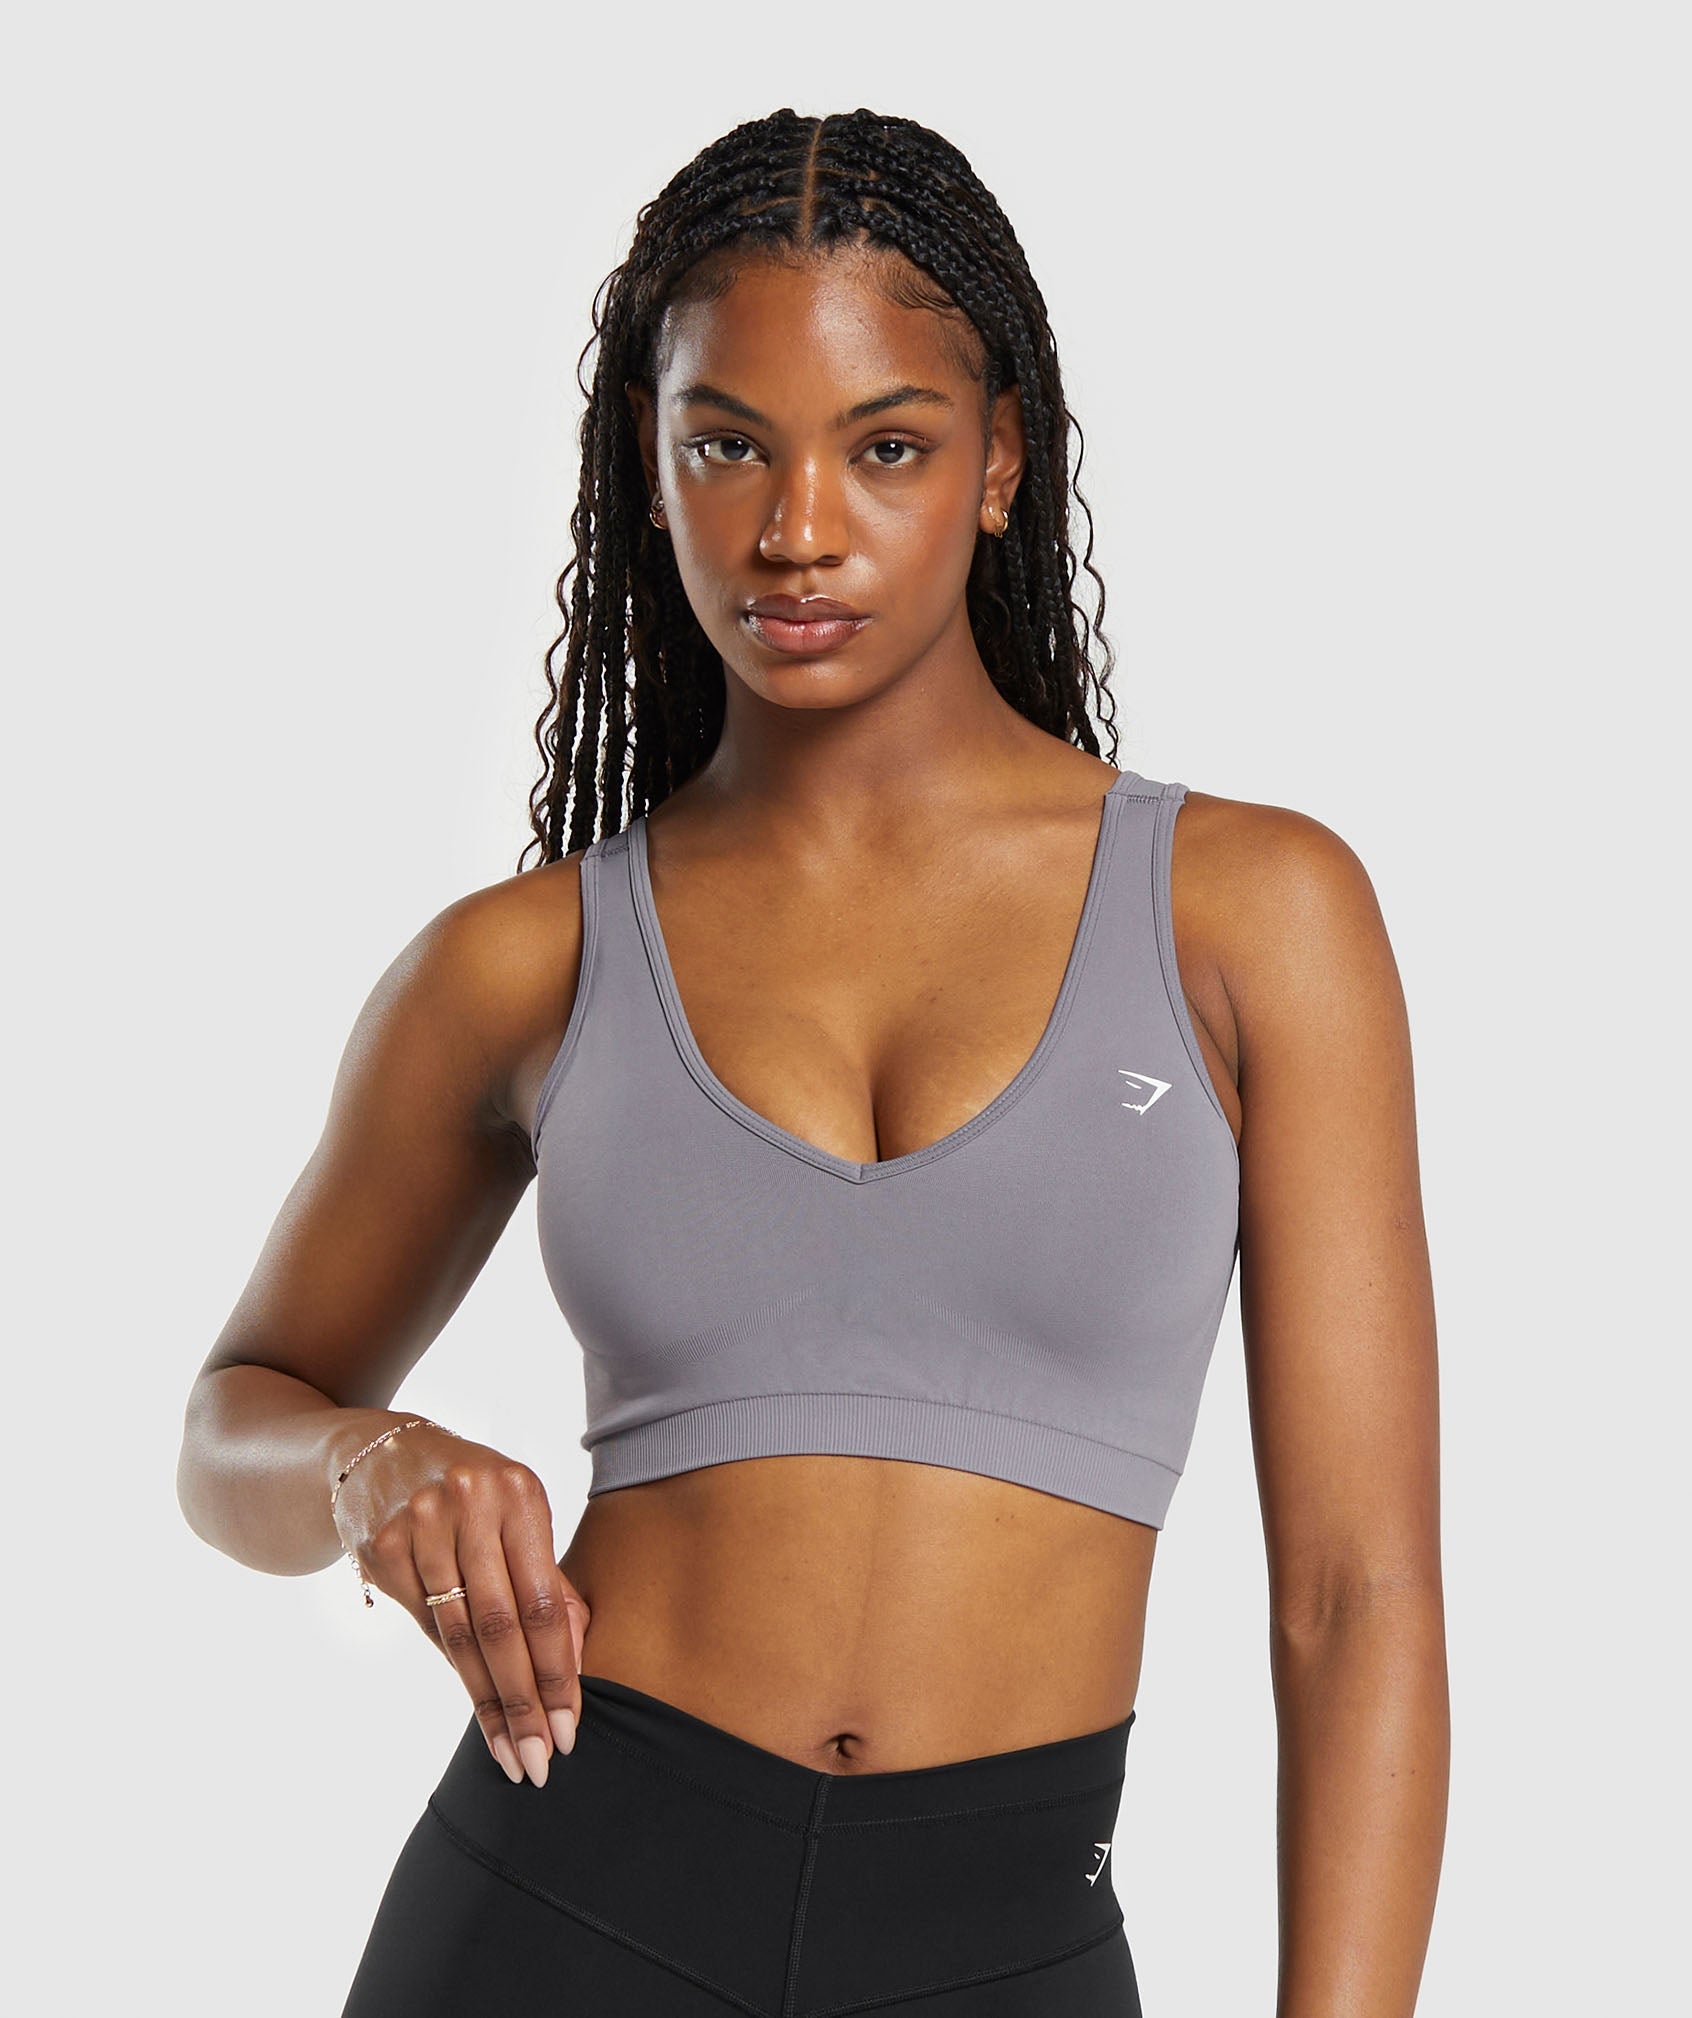 Buy SH GLOBLE Sport Bra for Every Day Comfort Every Day for Gym